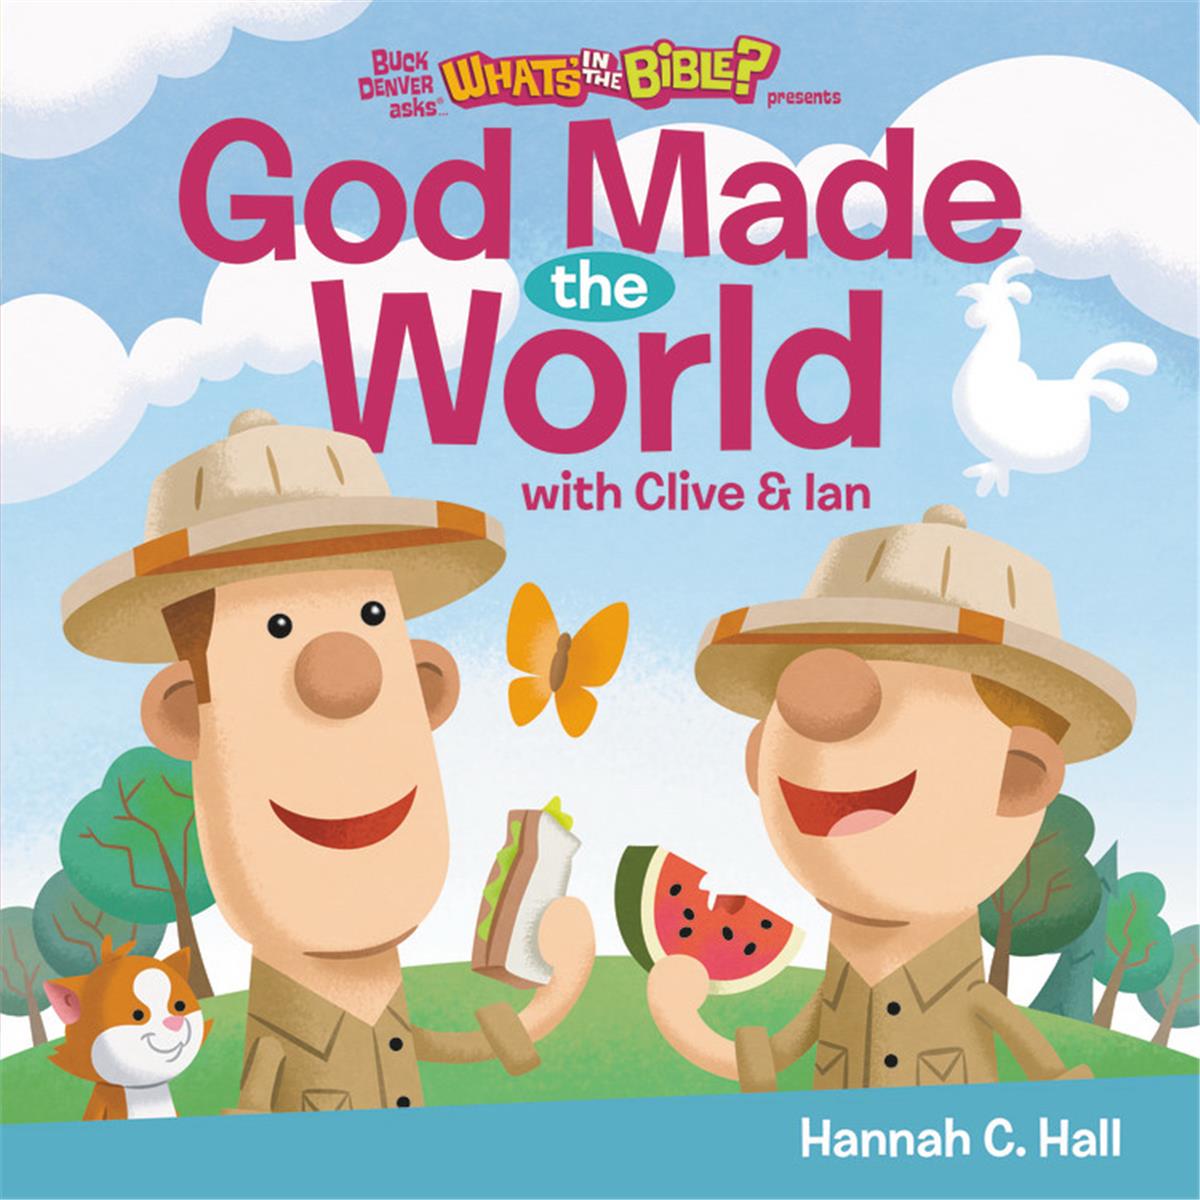 Jellytelly Press 172343 God Made The World - Buck Denver Asks Whats In The Bible